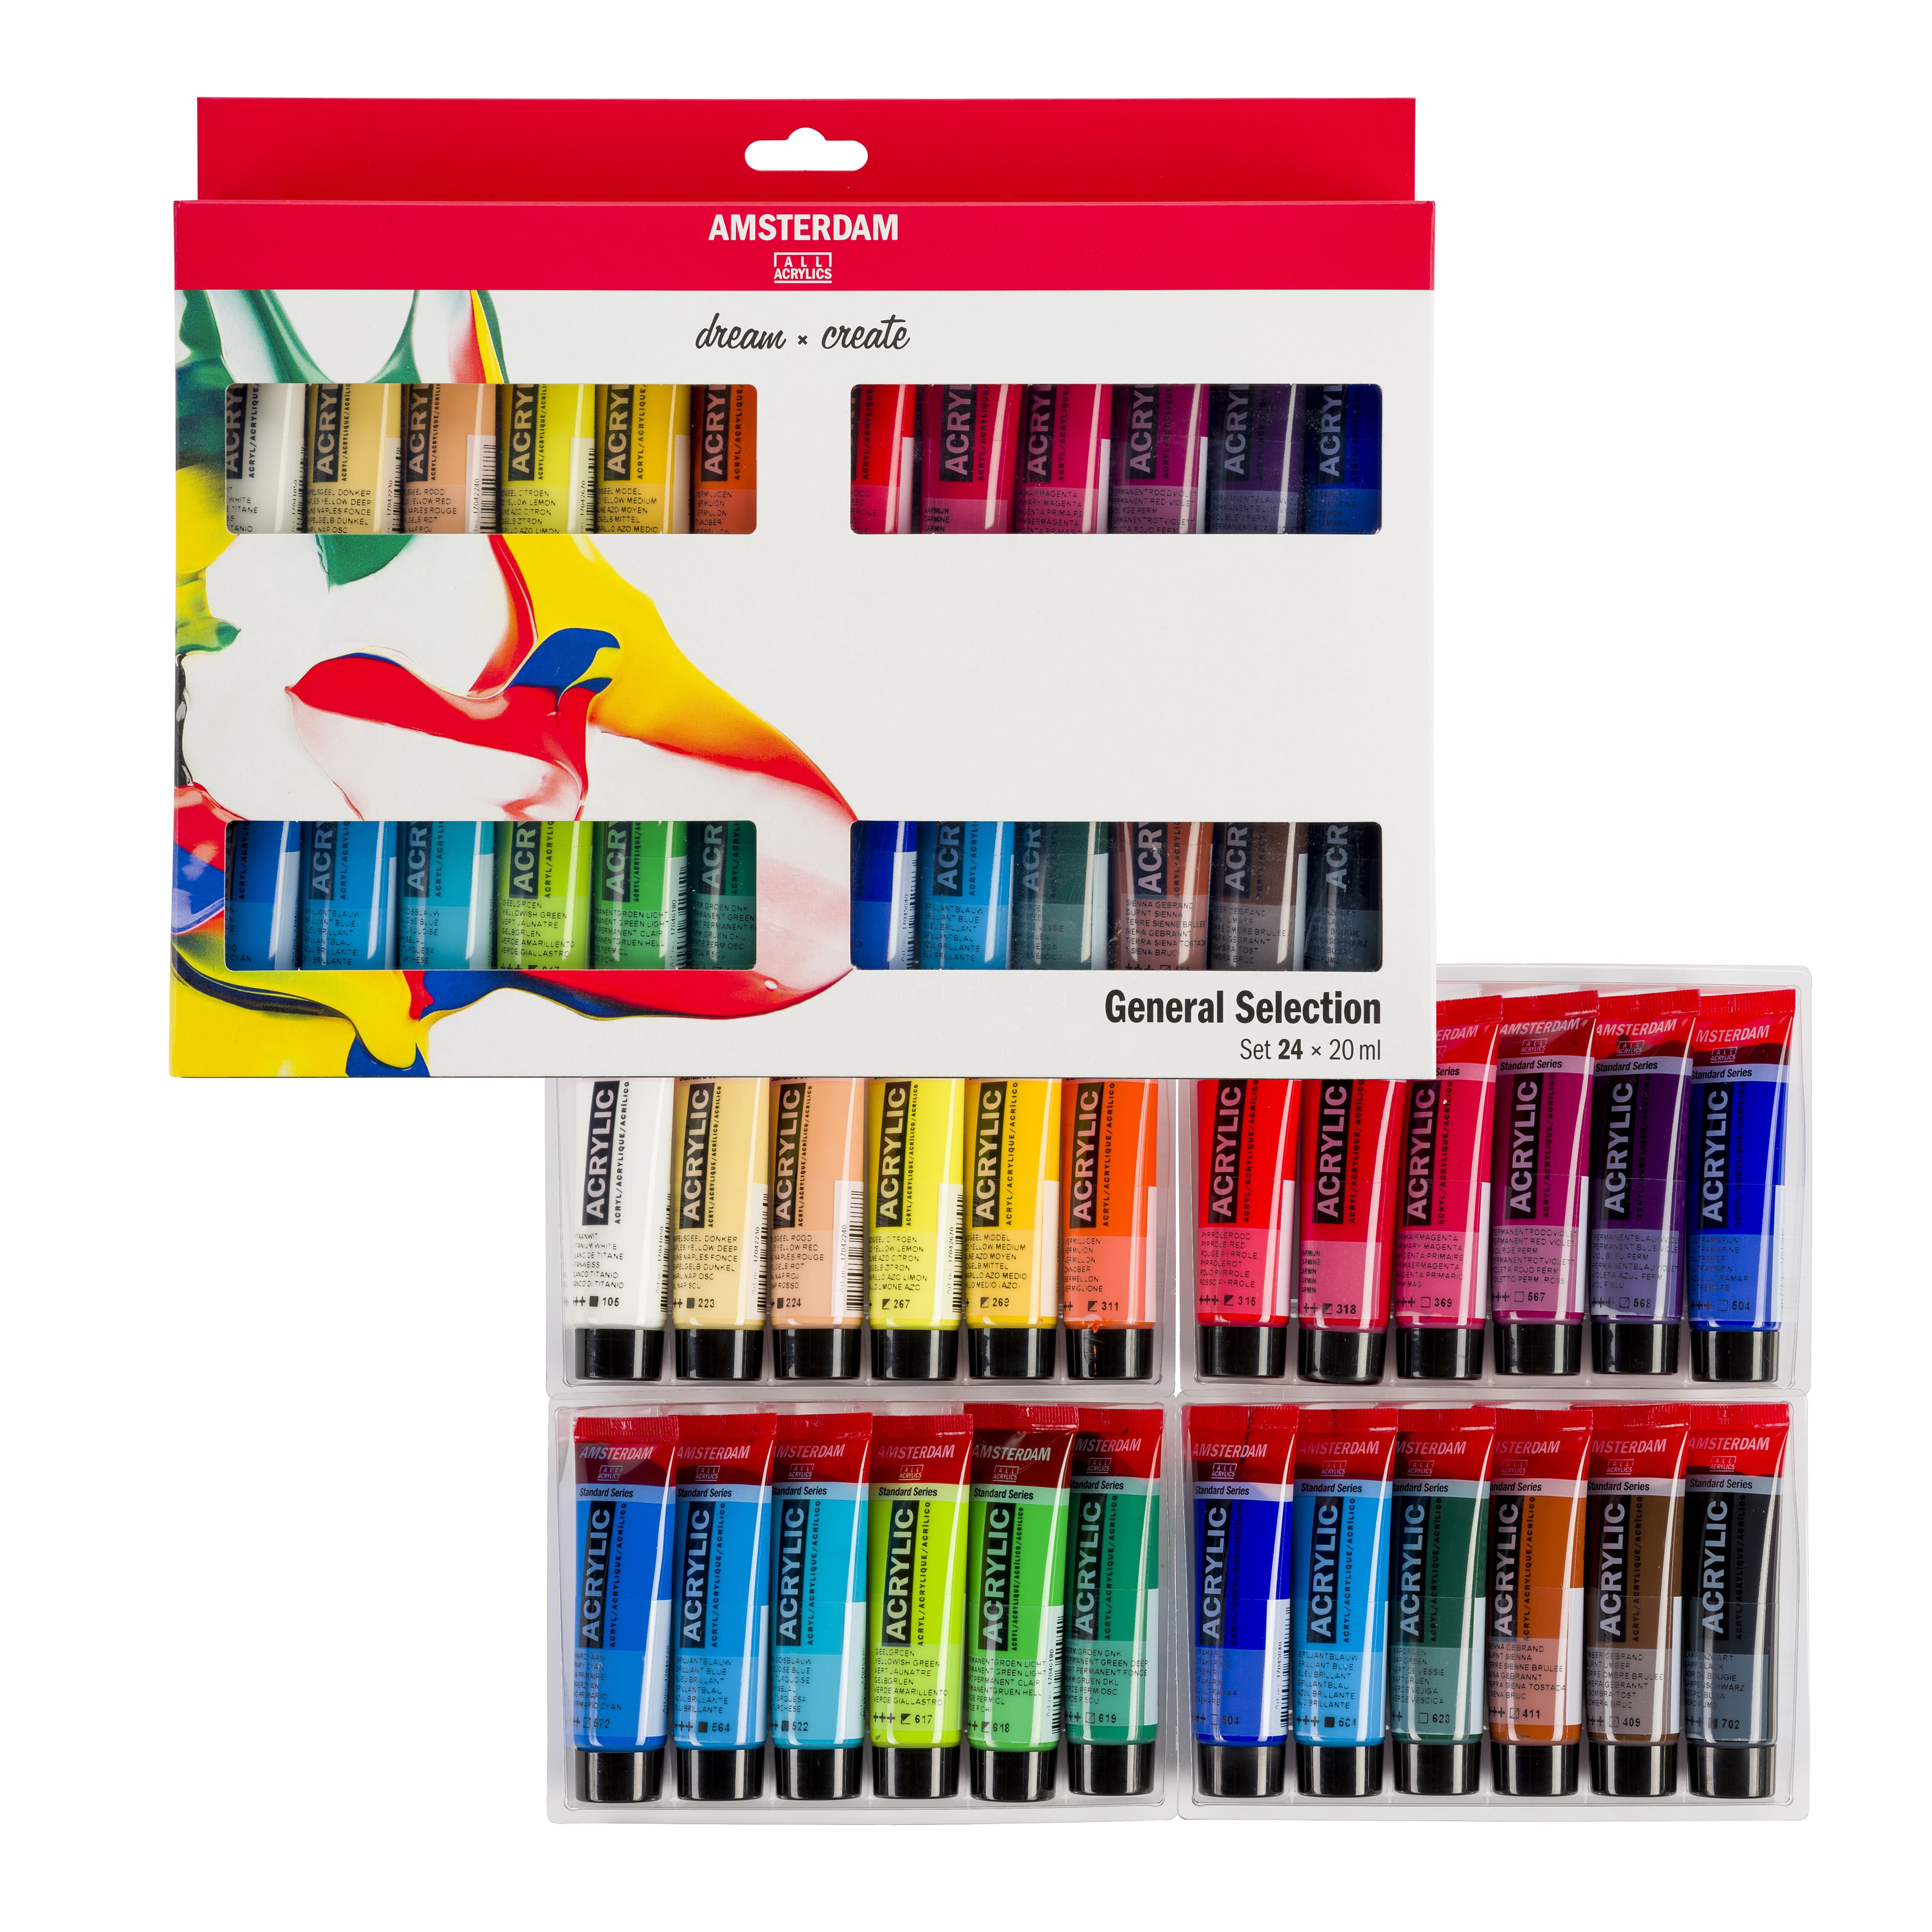 24 Color Acrylic Paint Value Pack by Artist's Loft™ Necessities